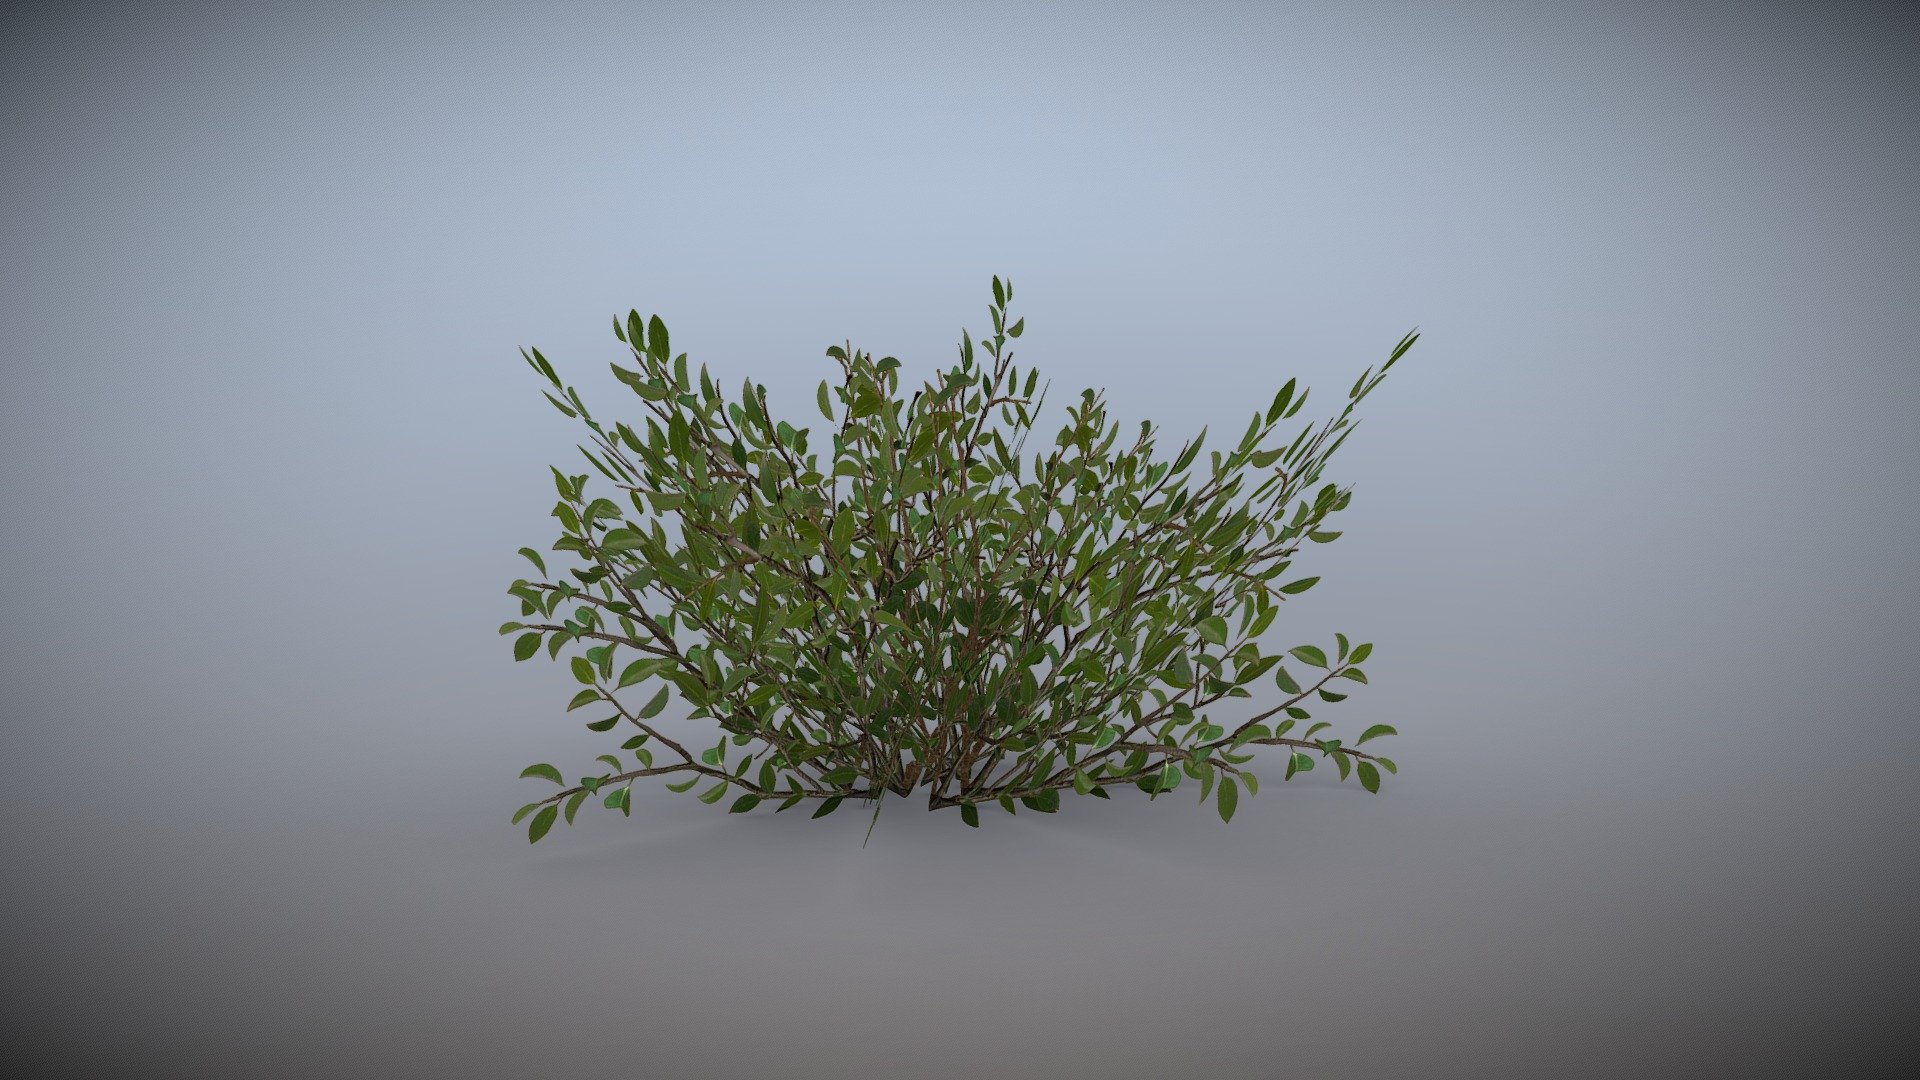 this bush can be used to scatter in game environments. its a low poly busy ready to use for games.

if you find any problem or issues related to this model please contact me 3d model